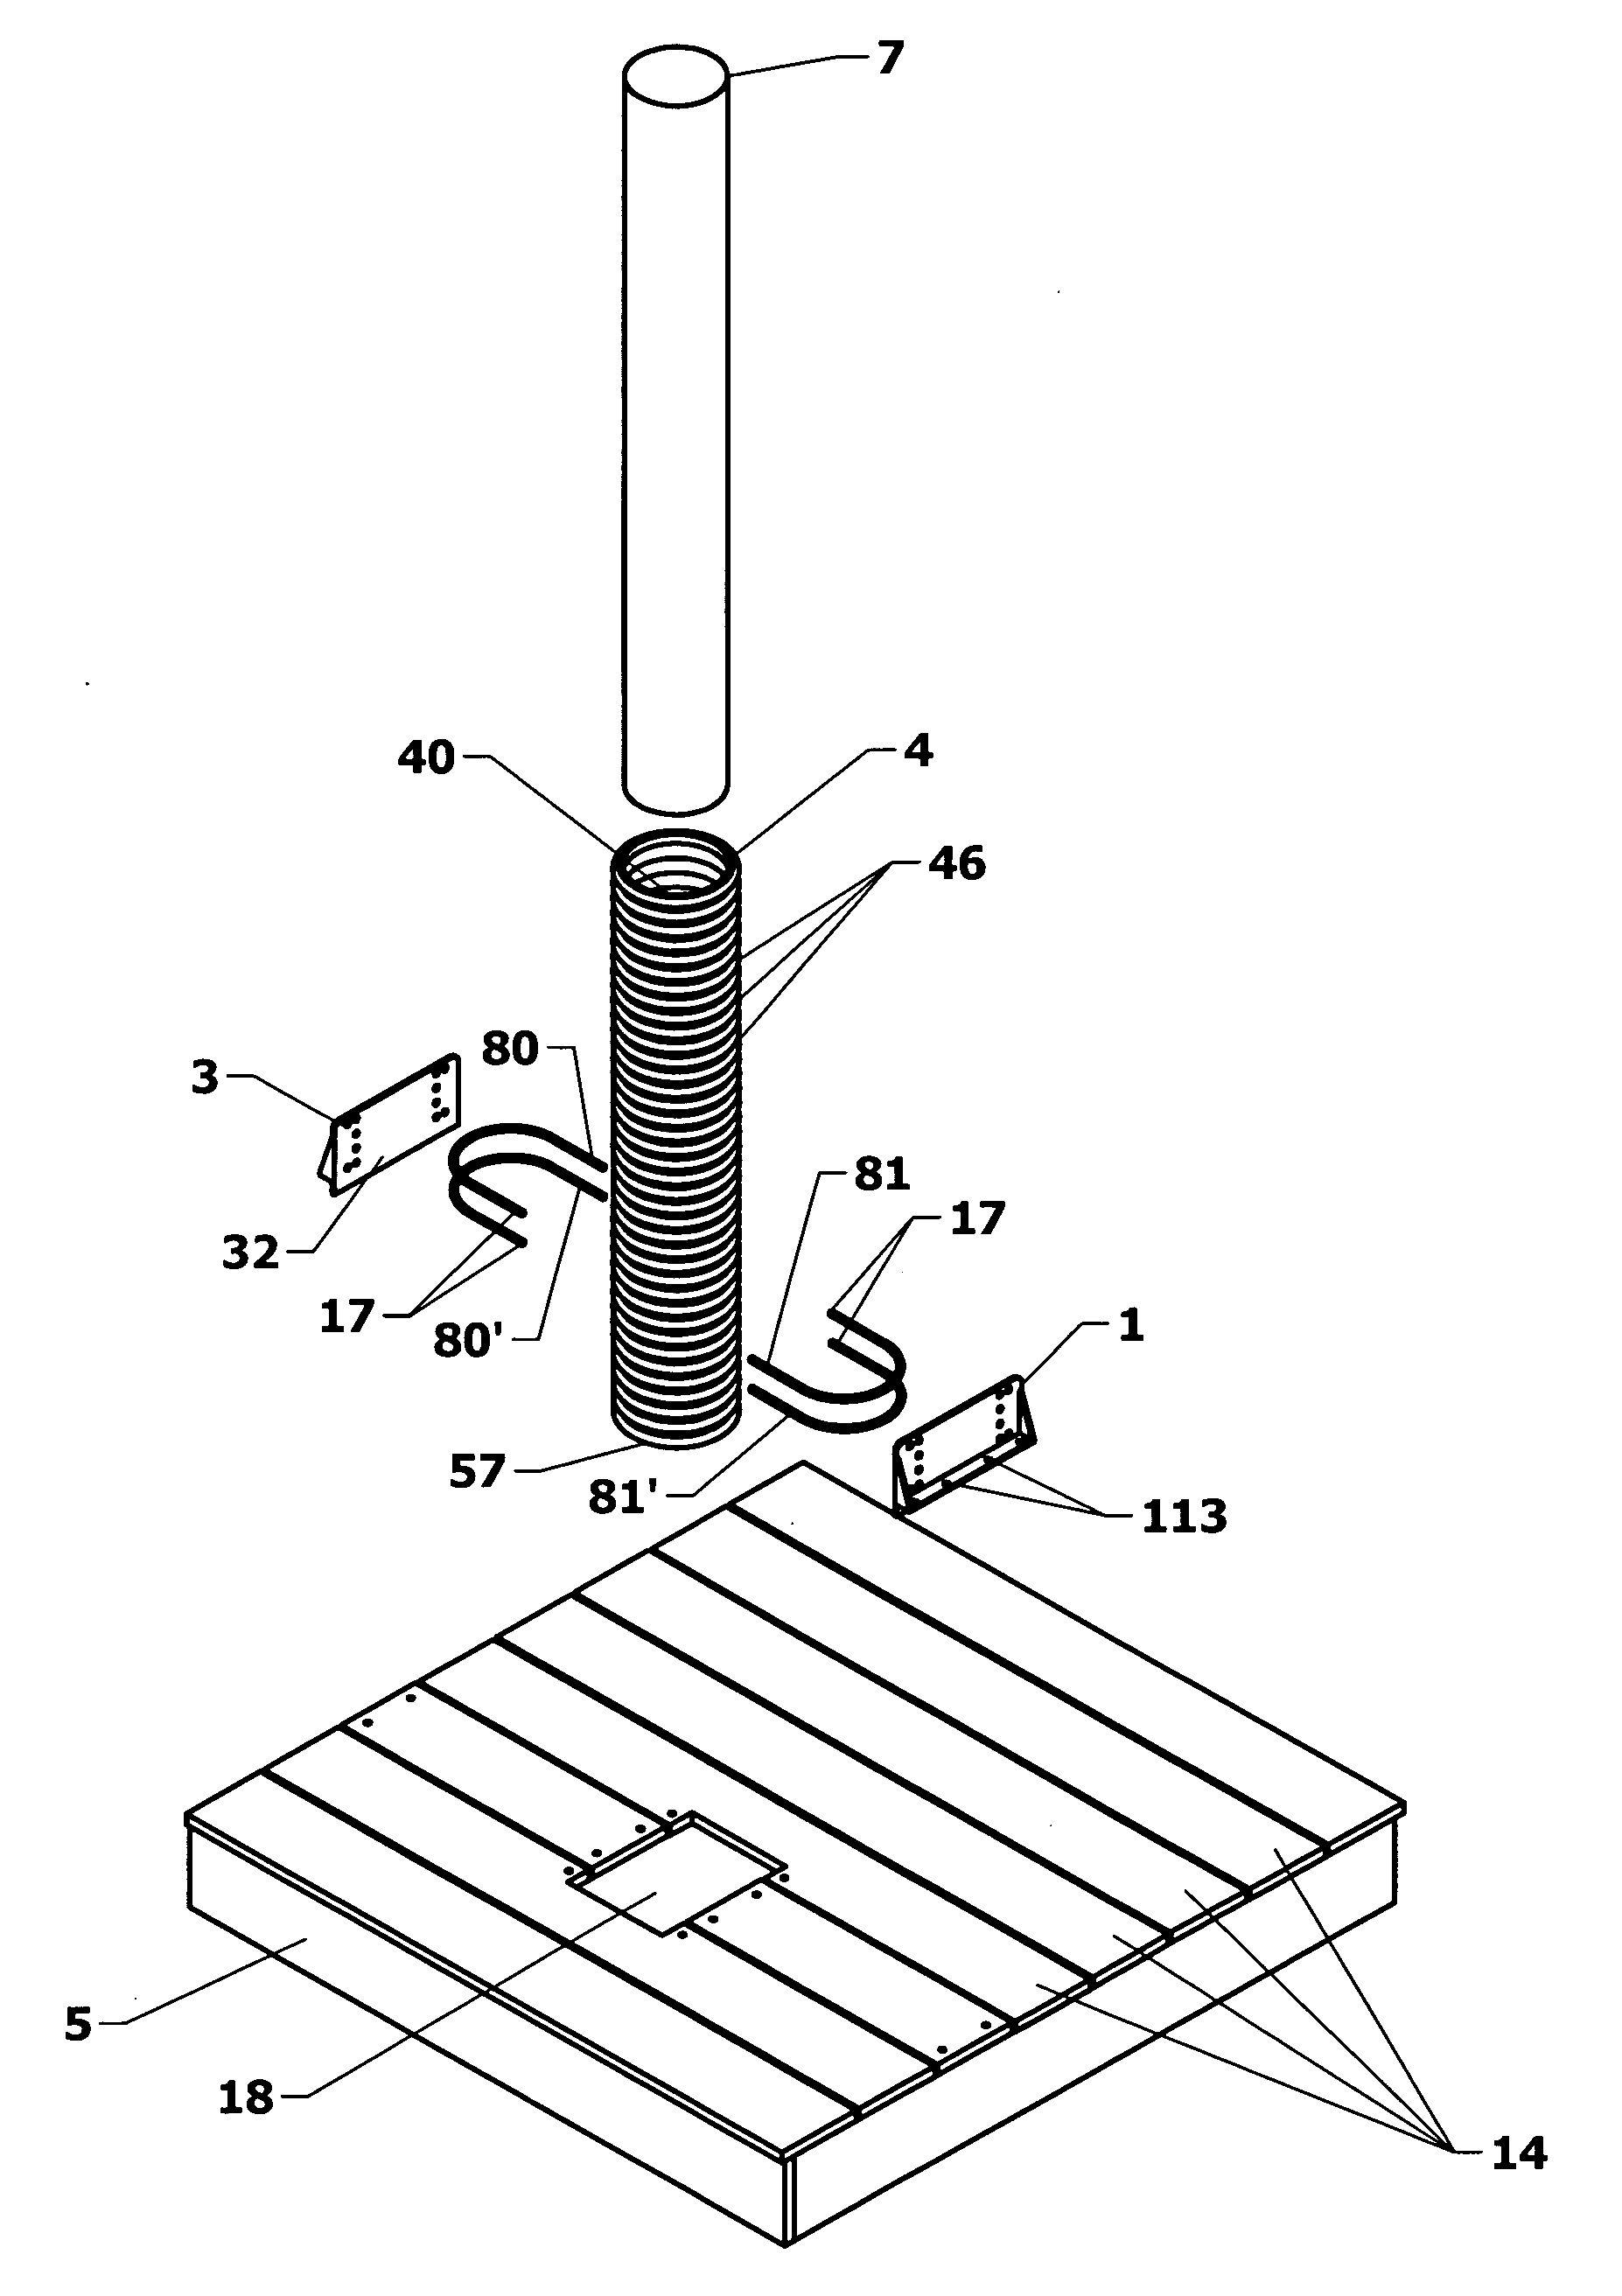 Apparatus for affixing a dock to an inboard mooring pole